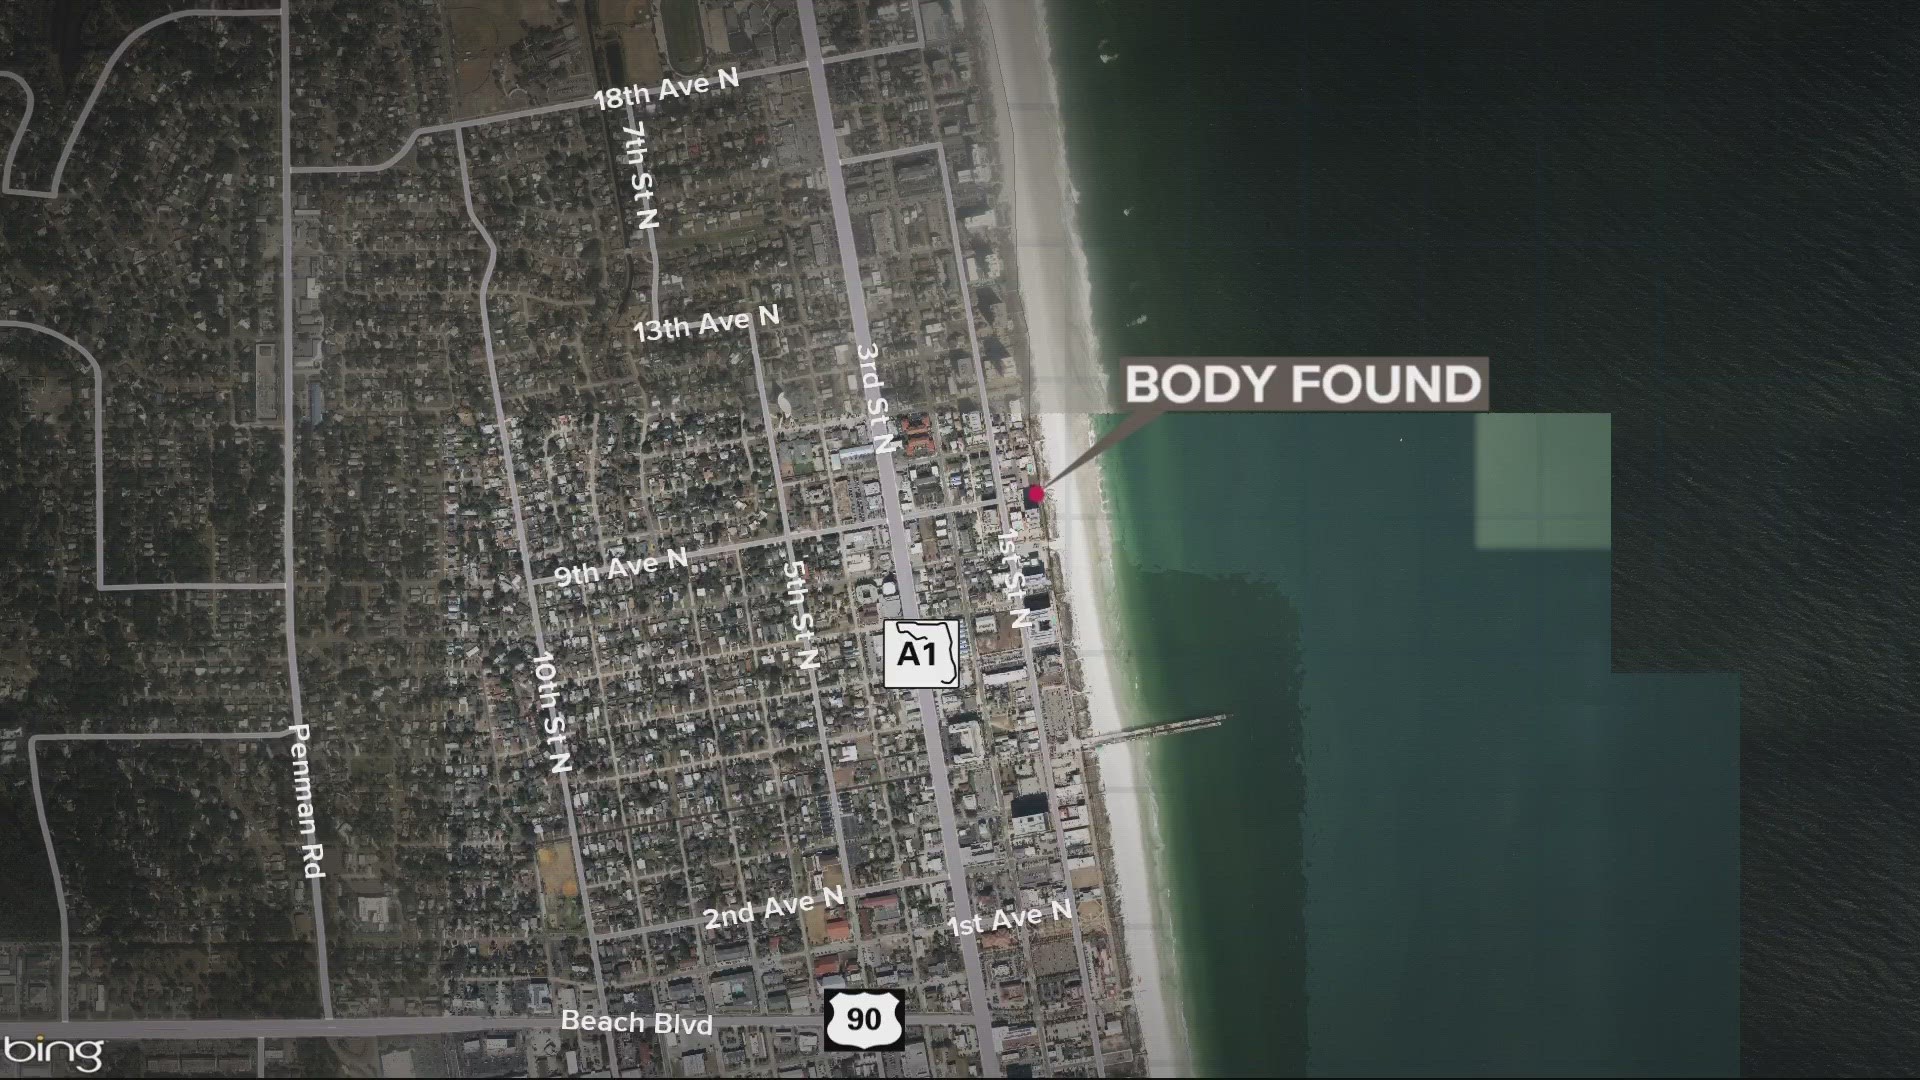 Man found dead from drowning in ocean at Jacksonville Beach